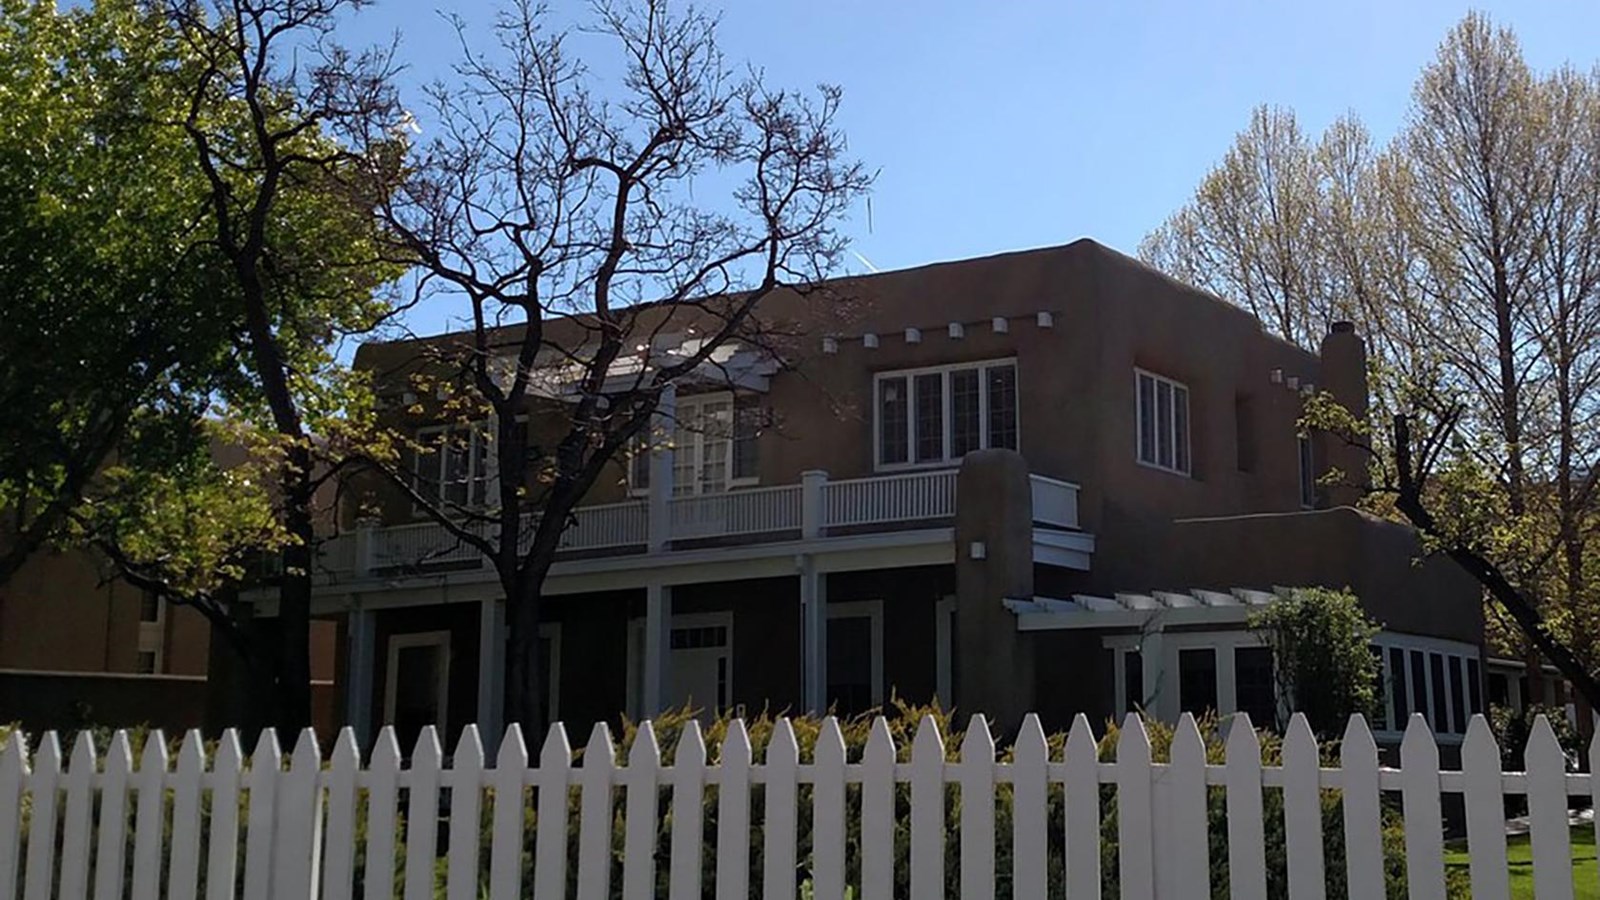 White picket fence in front of a two story adobe house with a white upstairs veranda.